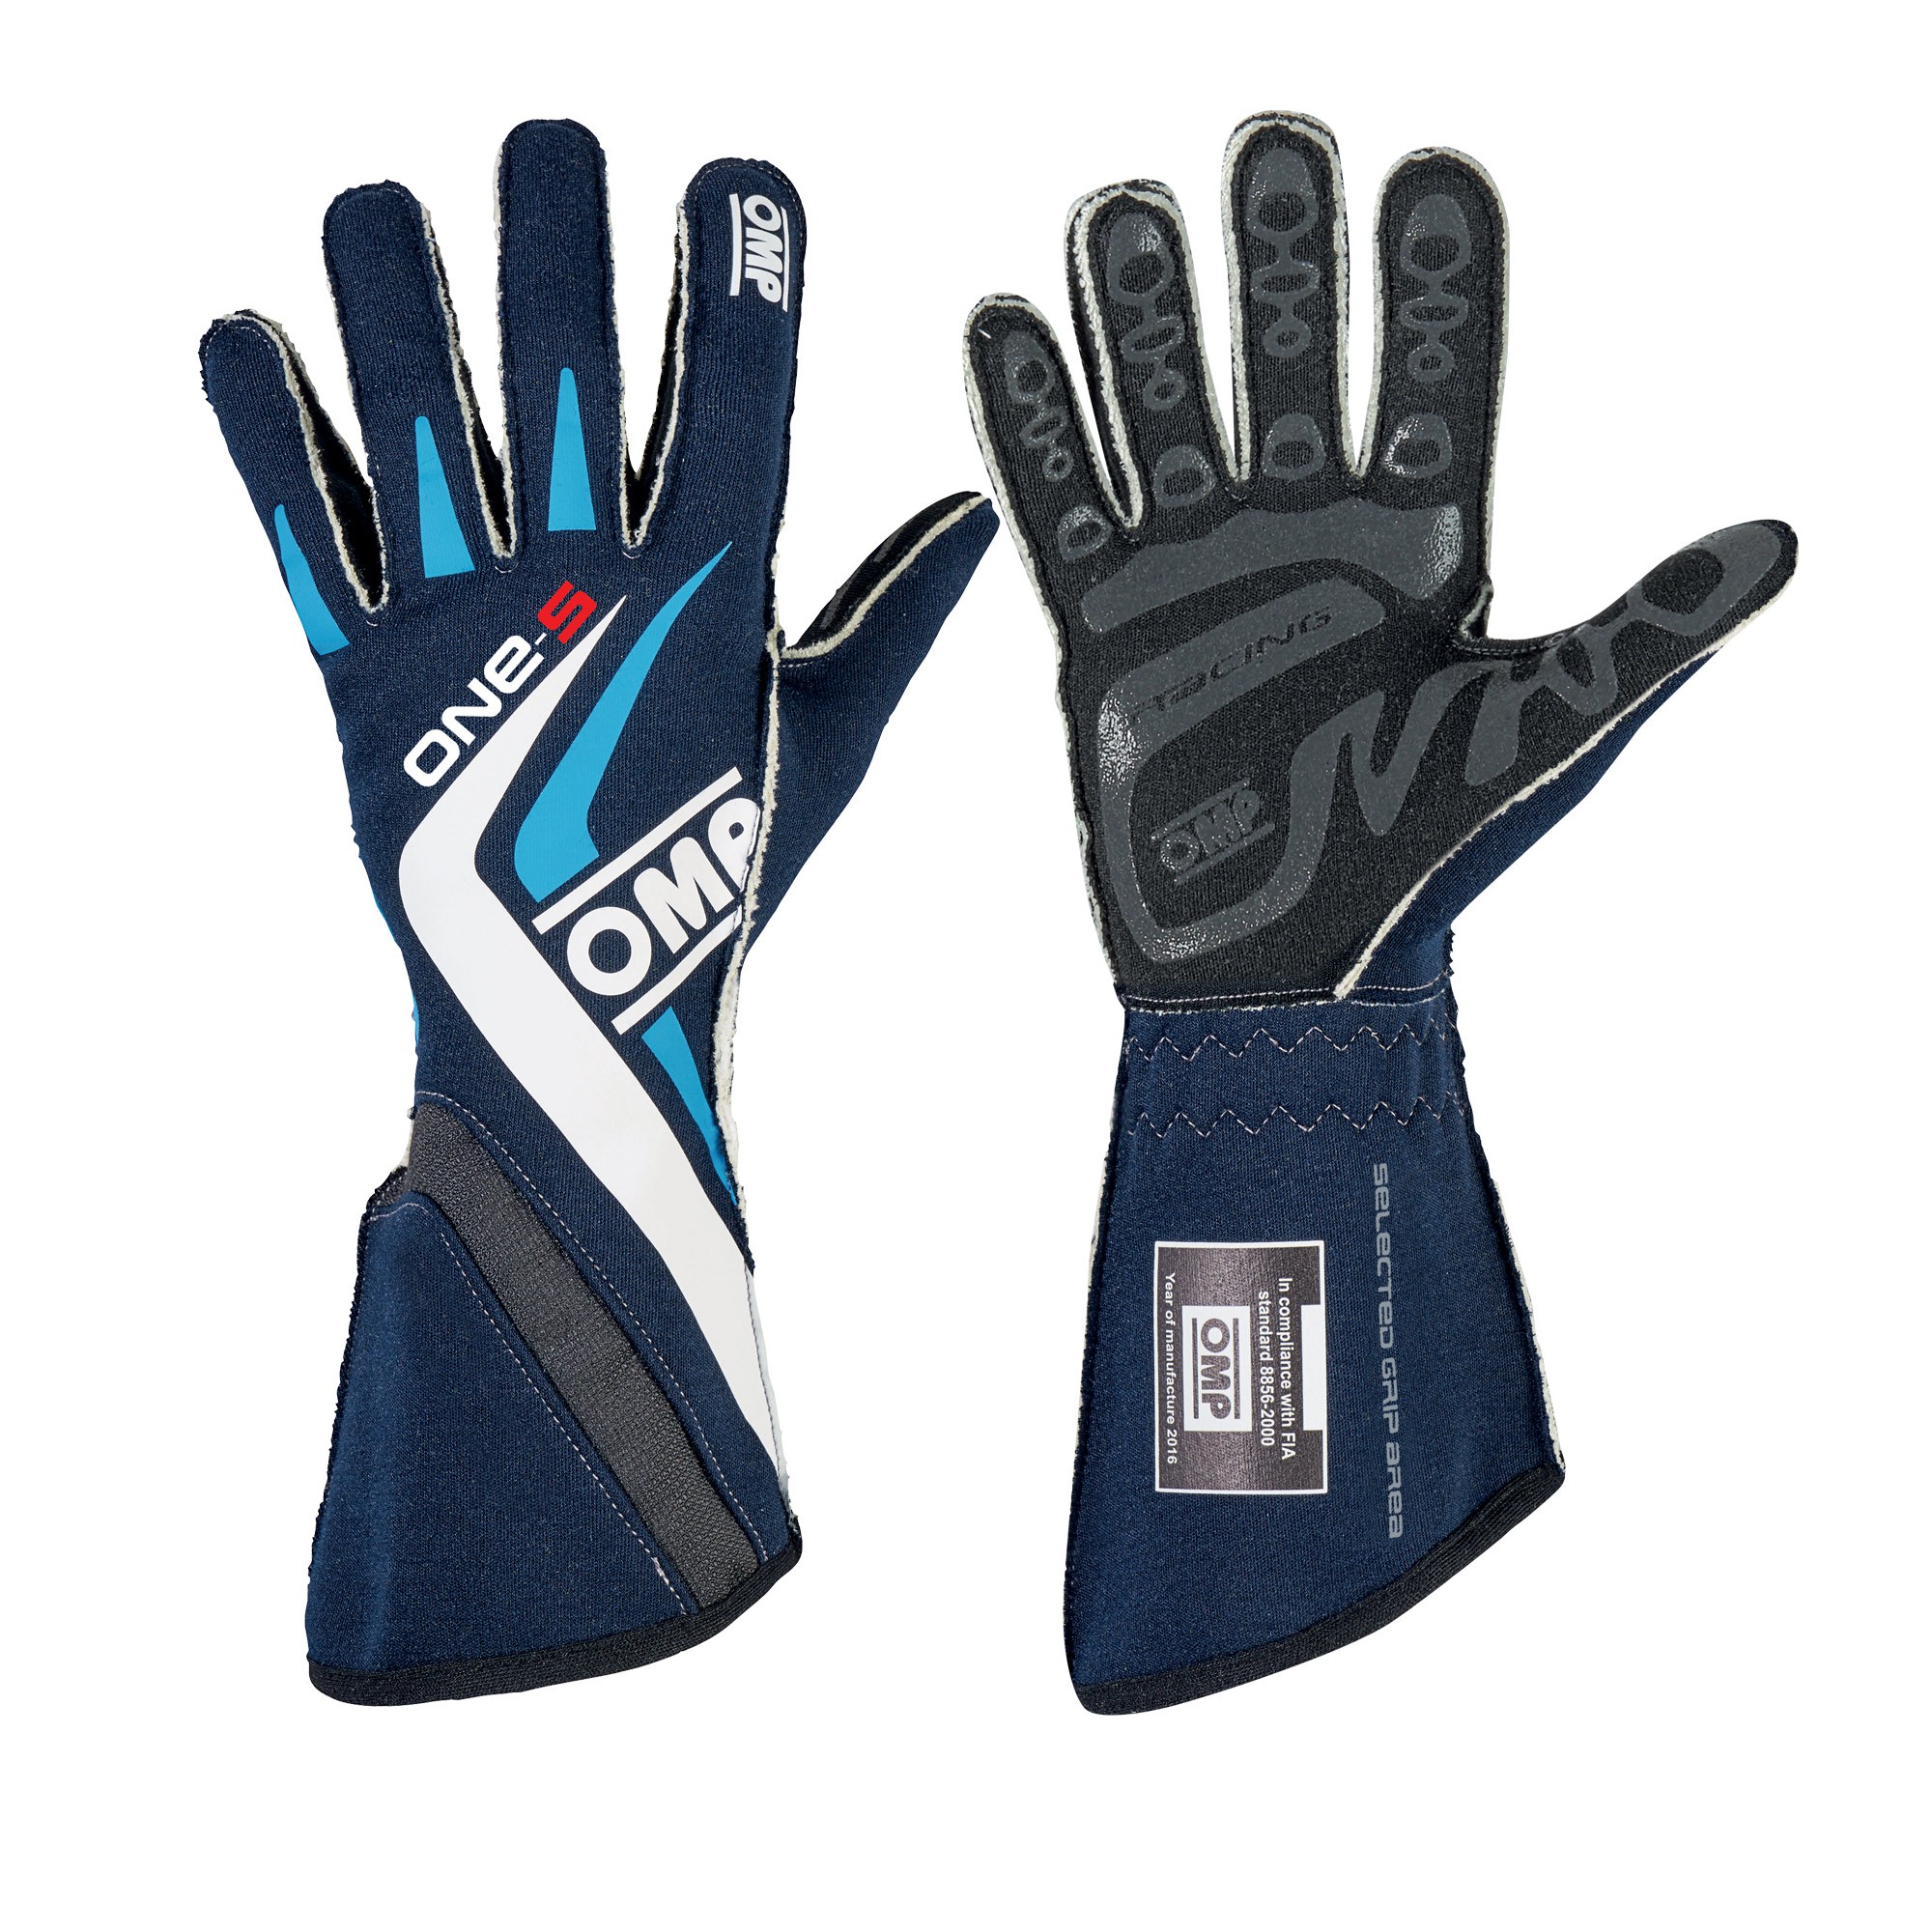 ONE-S GLOVES - Racing gloves | OMP Racing